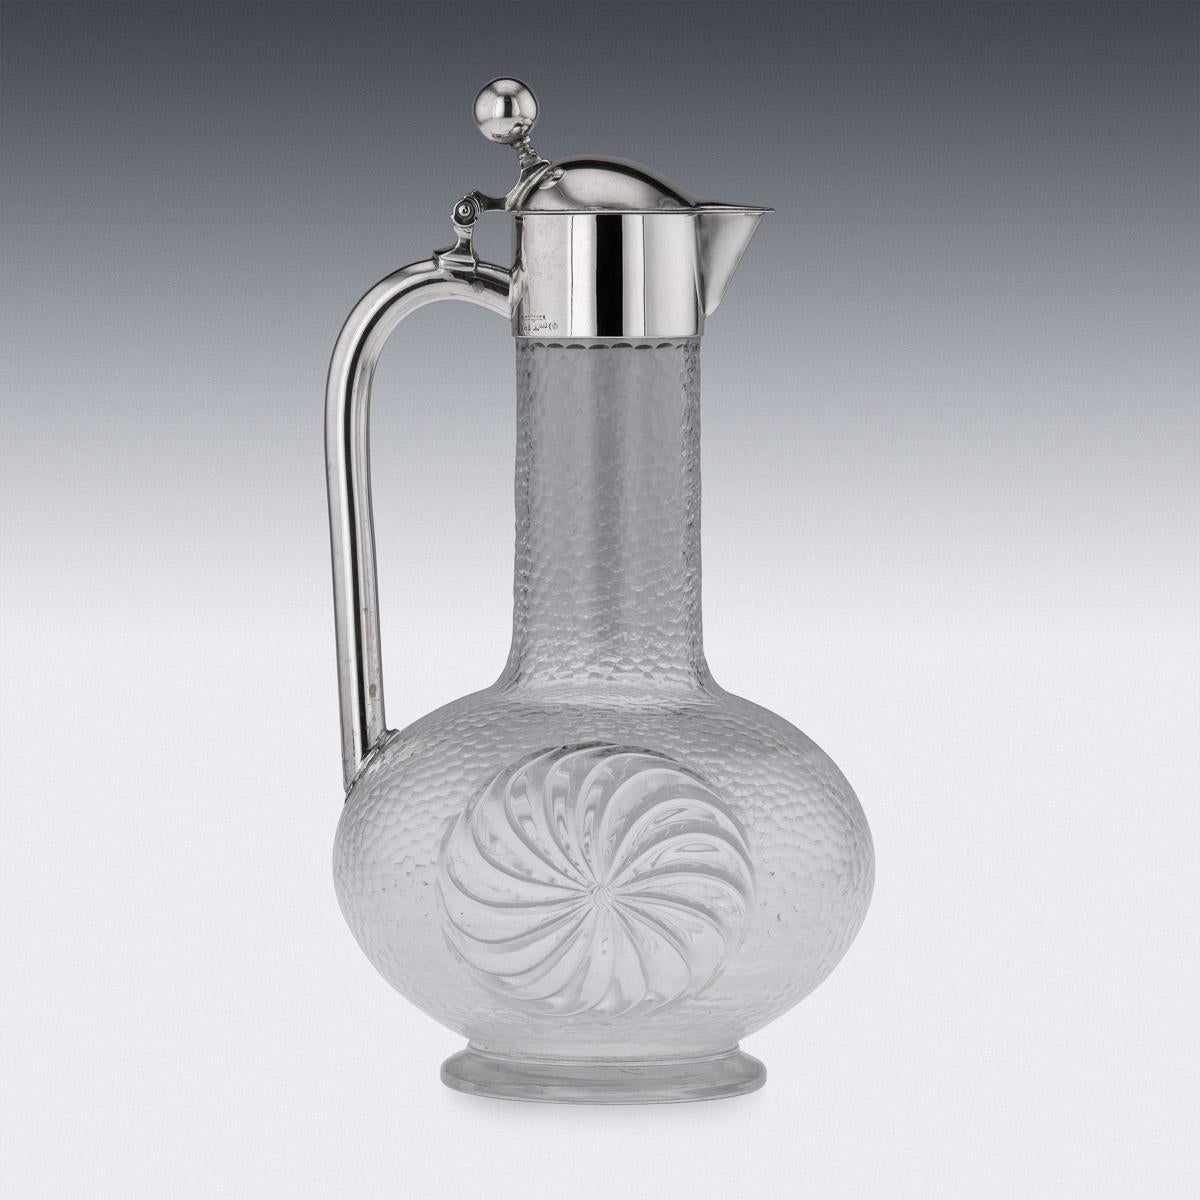 20th Century German Solid Silver & Etched Glass Claret Jug, circa 1900 For Sale 1